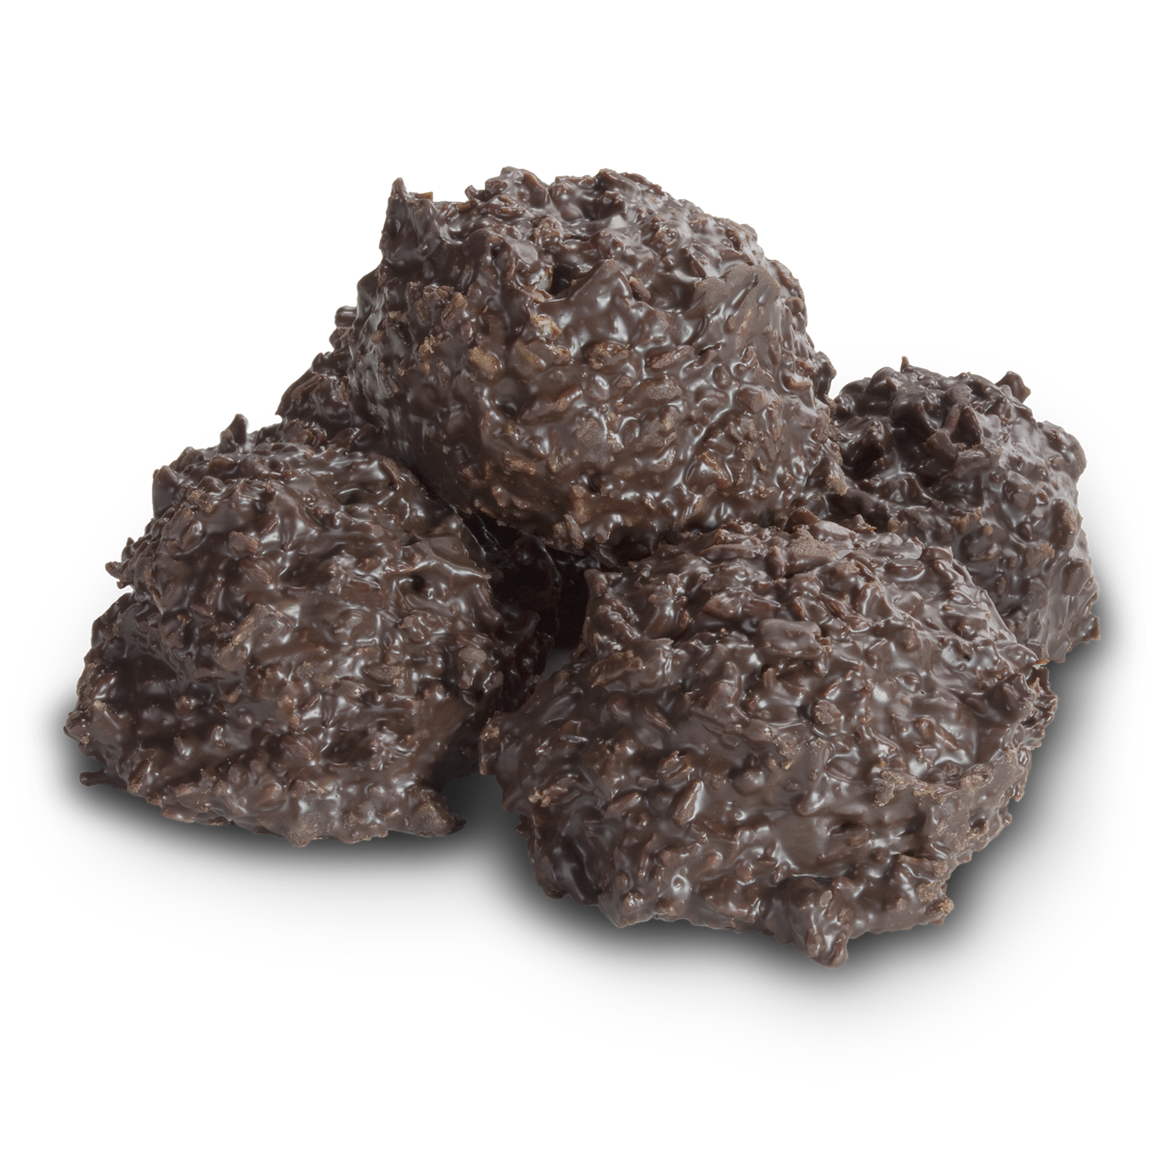 All City Candy Dark Chocolate Coconut Haystacks - 1 LB Box Chocolate Albanese Confectionery For fresh candy and great service, visit www.allcitycandy.com